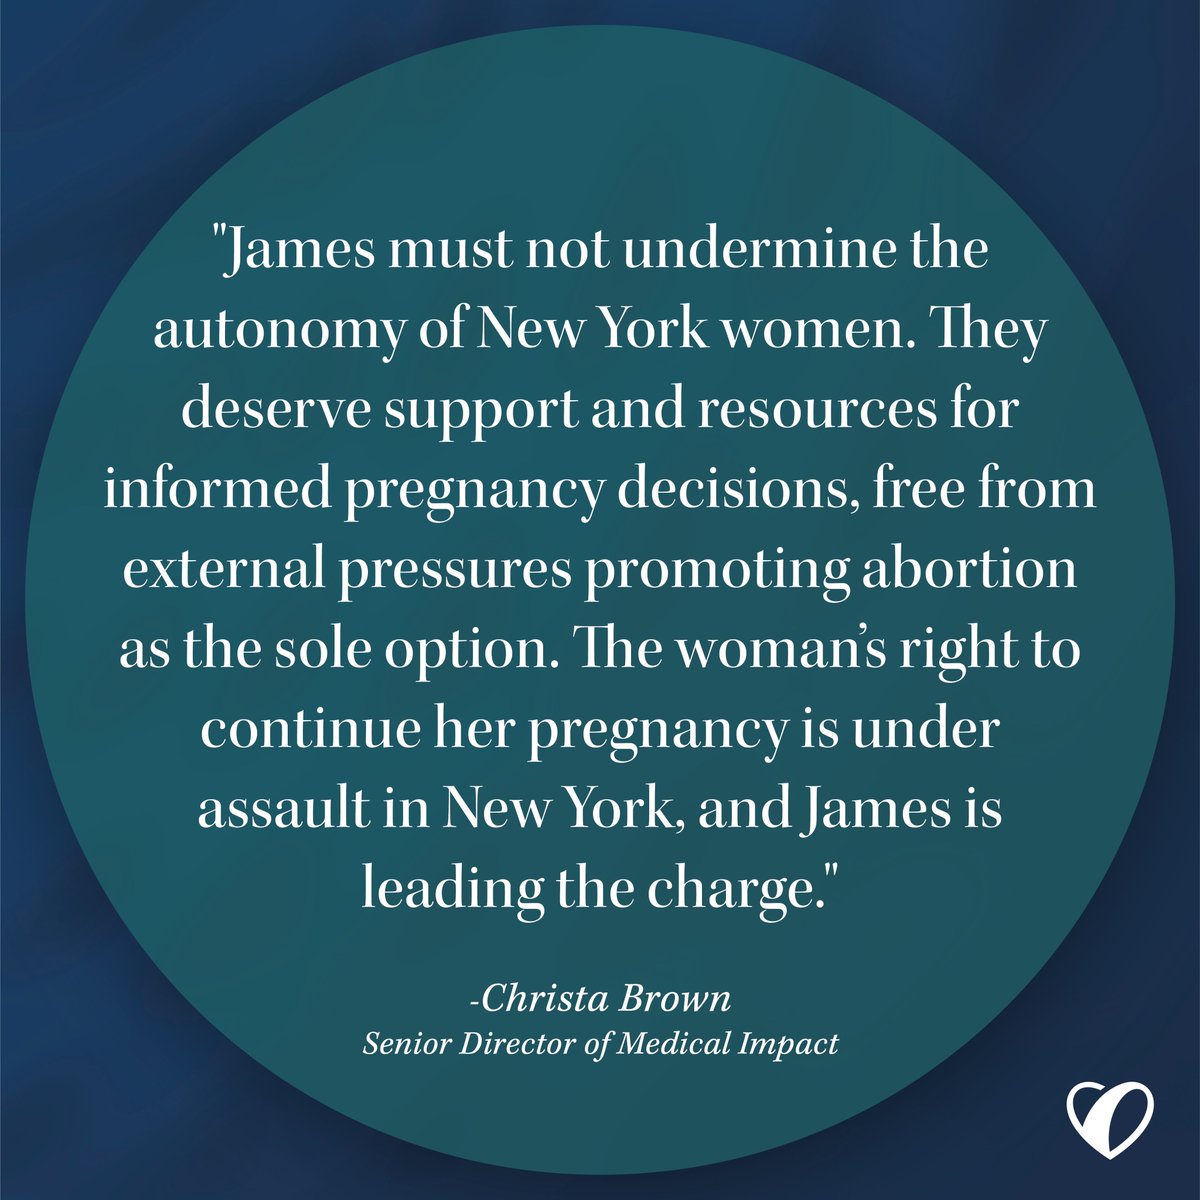 New York Attorney General Letitia James wants to limit pregnant women’s choices. Here is what Heartbeat’s Senior Director of Medical Impact, Christa Brown, has to say about it ⬇️ washingtonexaminer.com/opinion/300323…